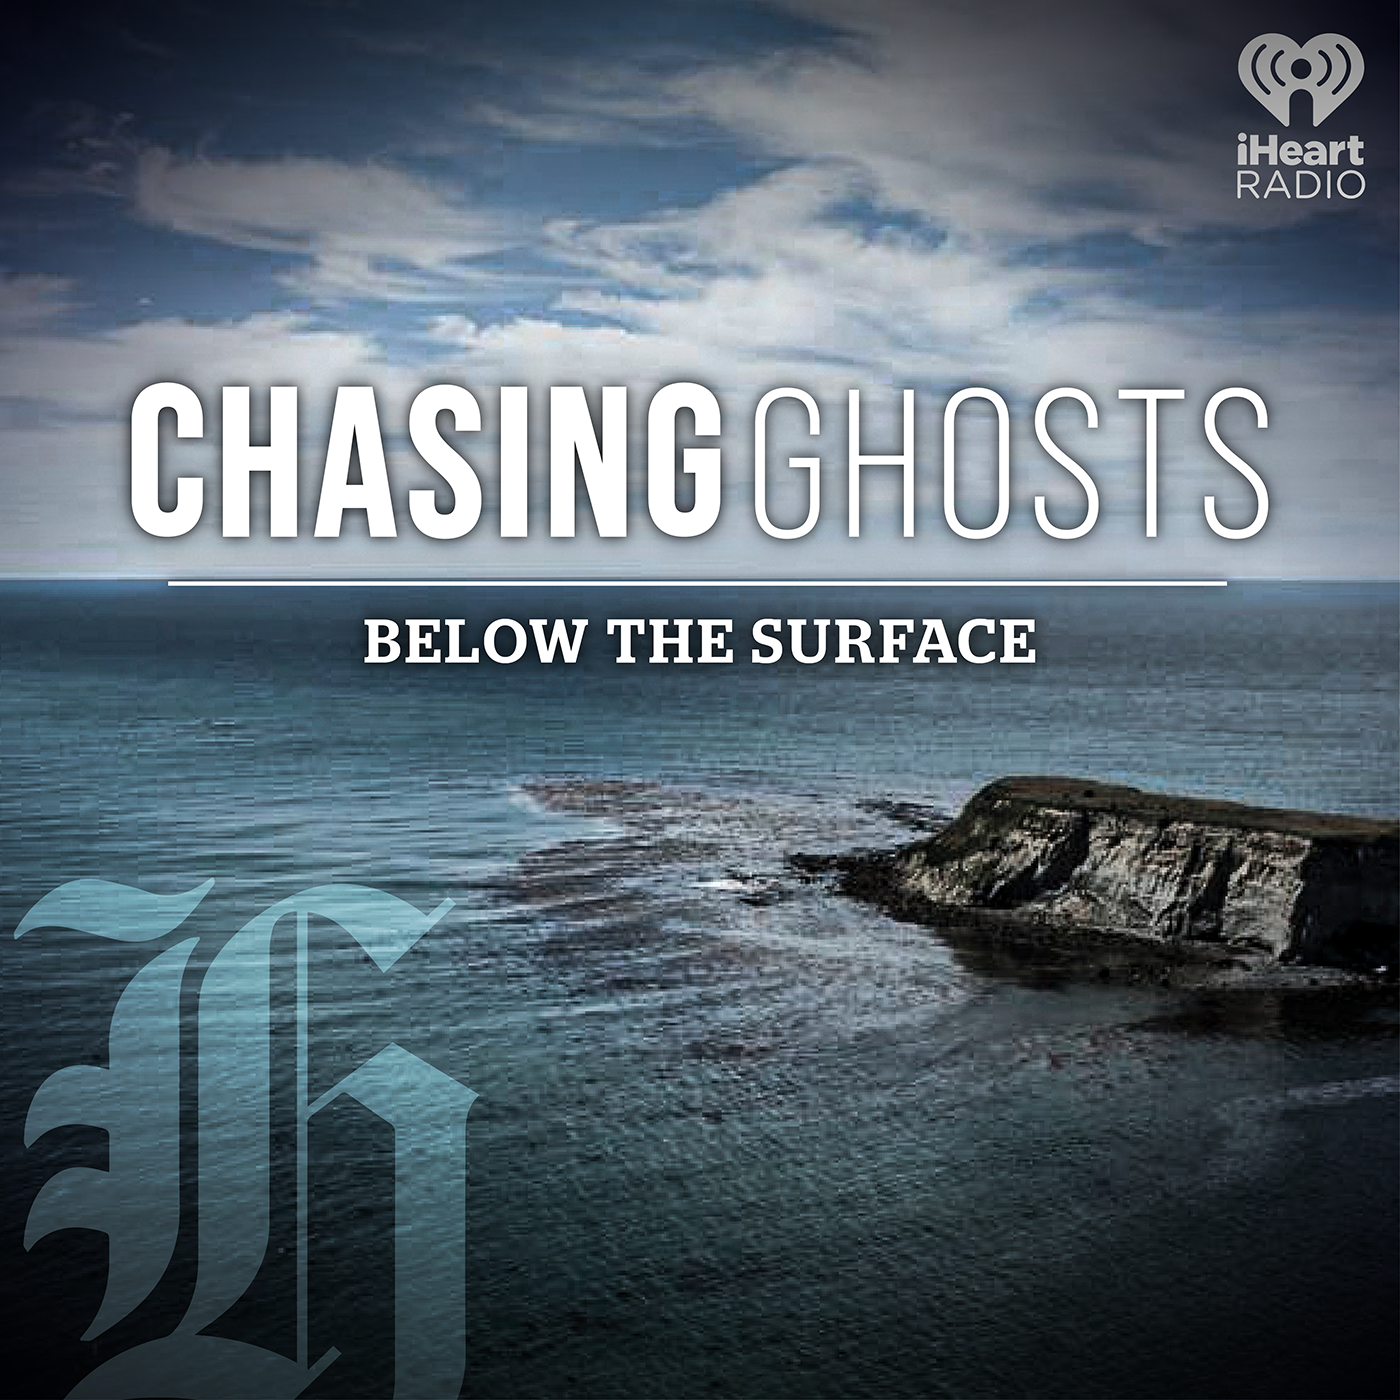 NZ Herald presents: Chasing Ghosts - Below the Surface